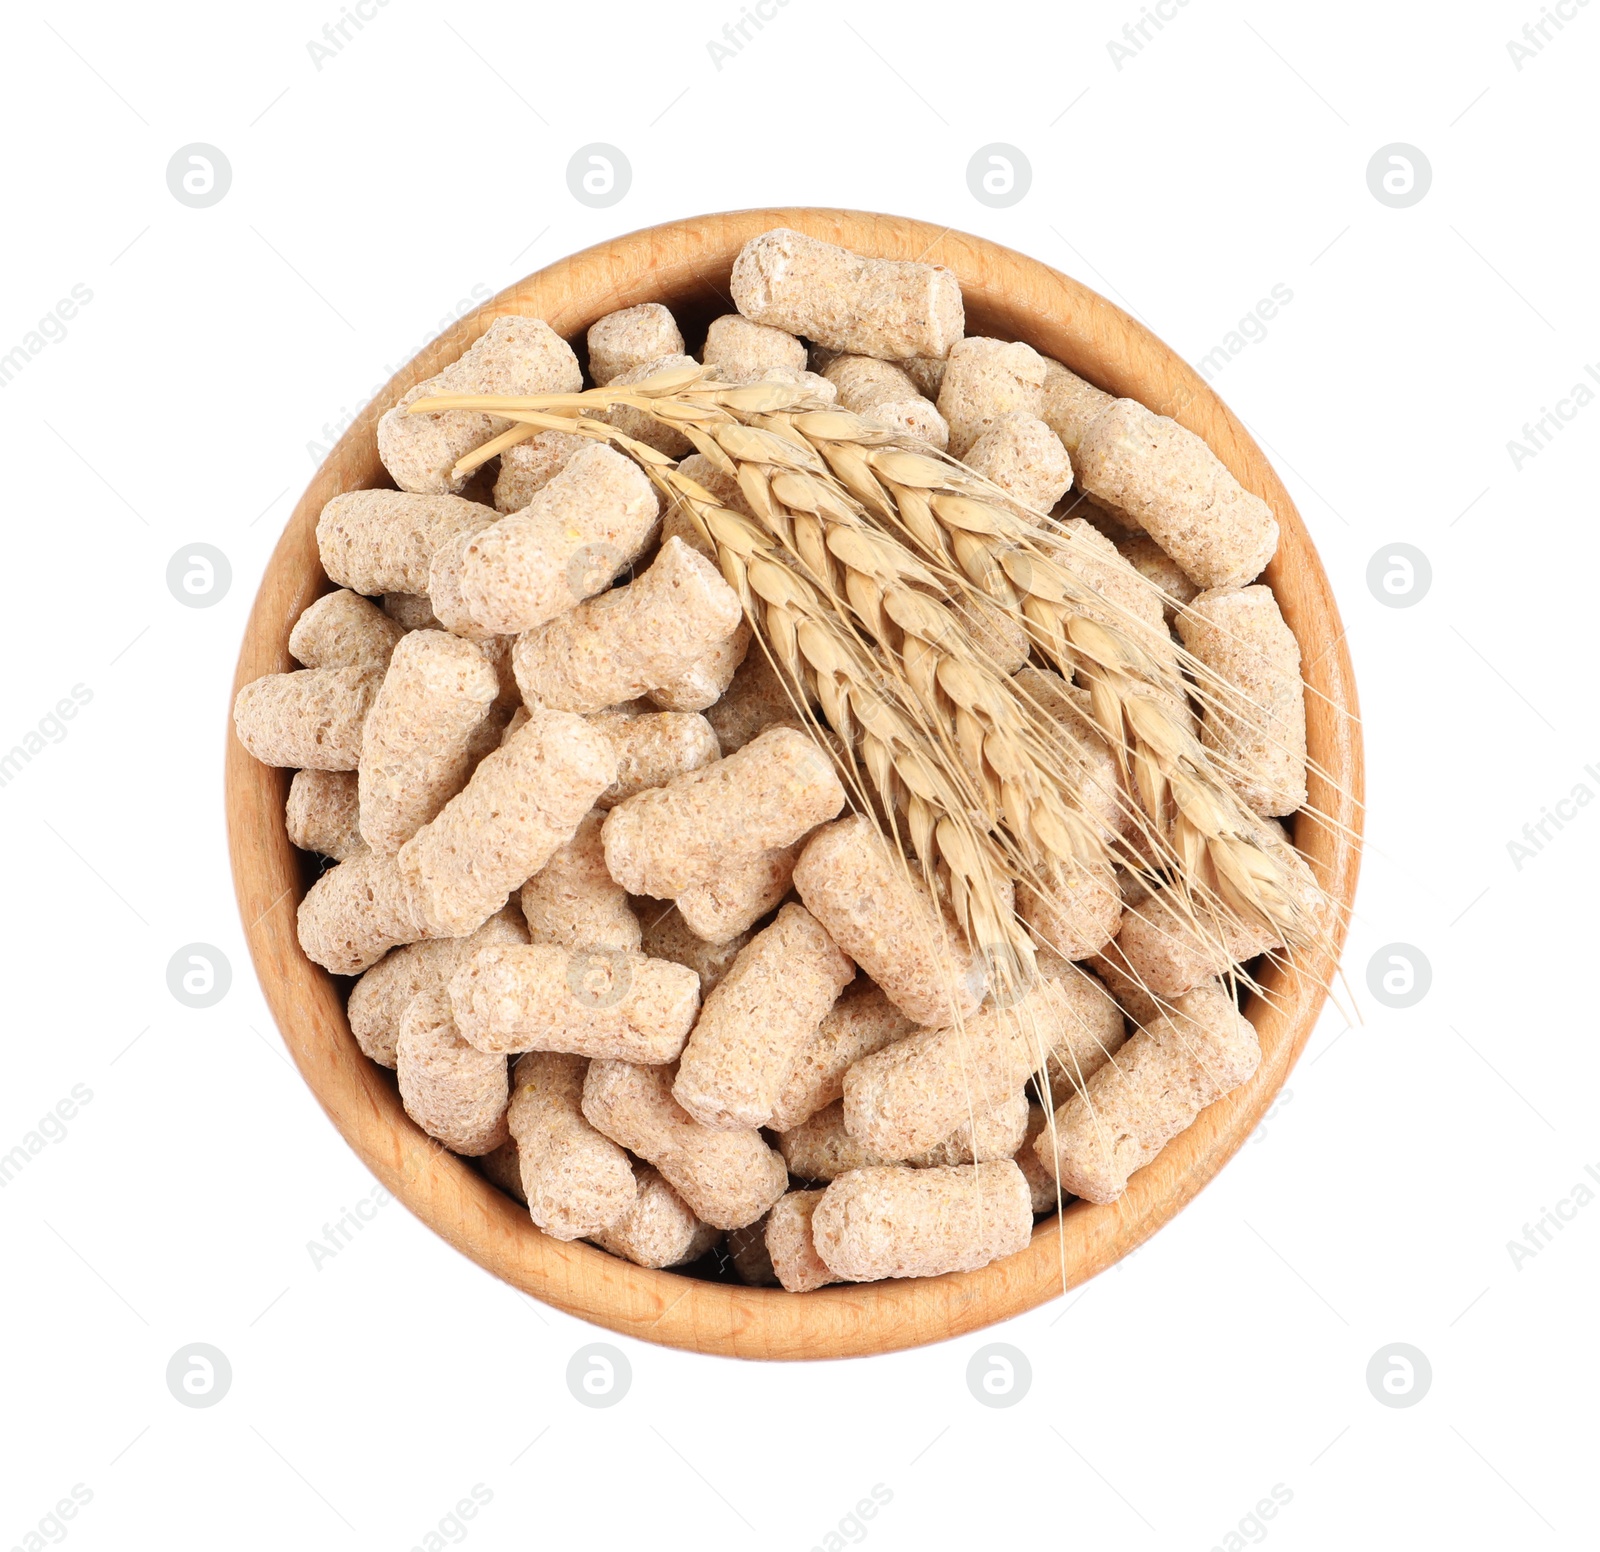 Photo of Granulated wheat bran and spikelets in bowl on white background, top view